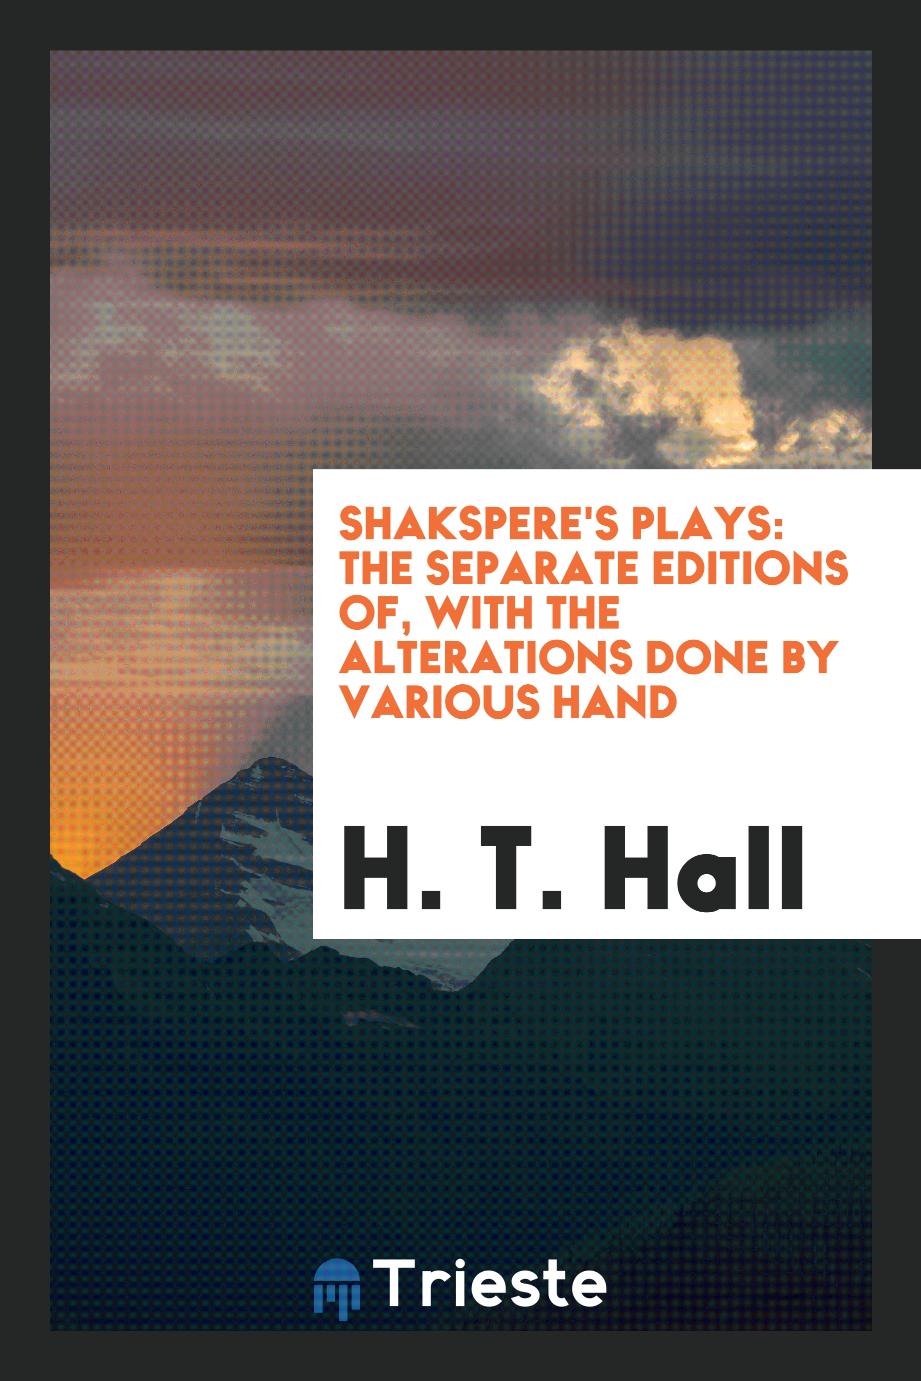 Shakspere's Plays: The Separate Editions of, with the alterations done by various hand